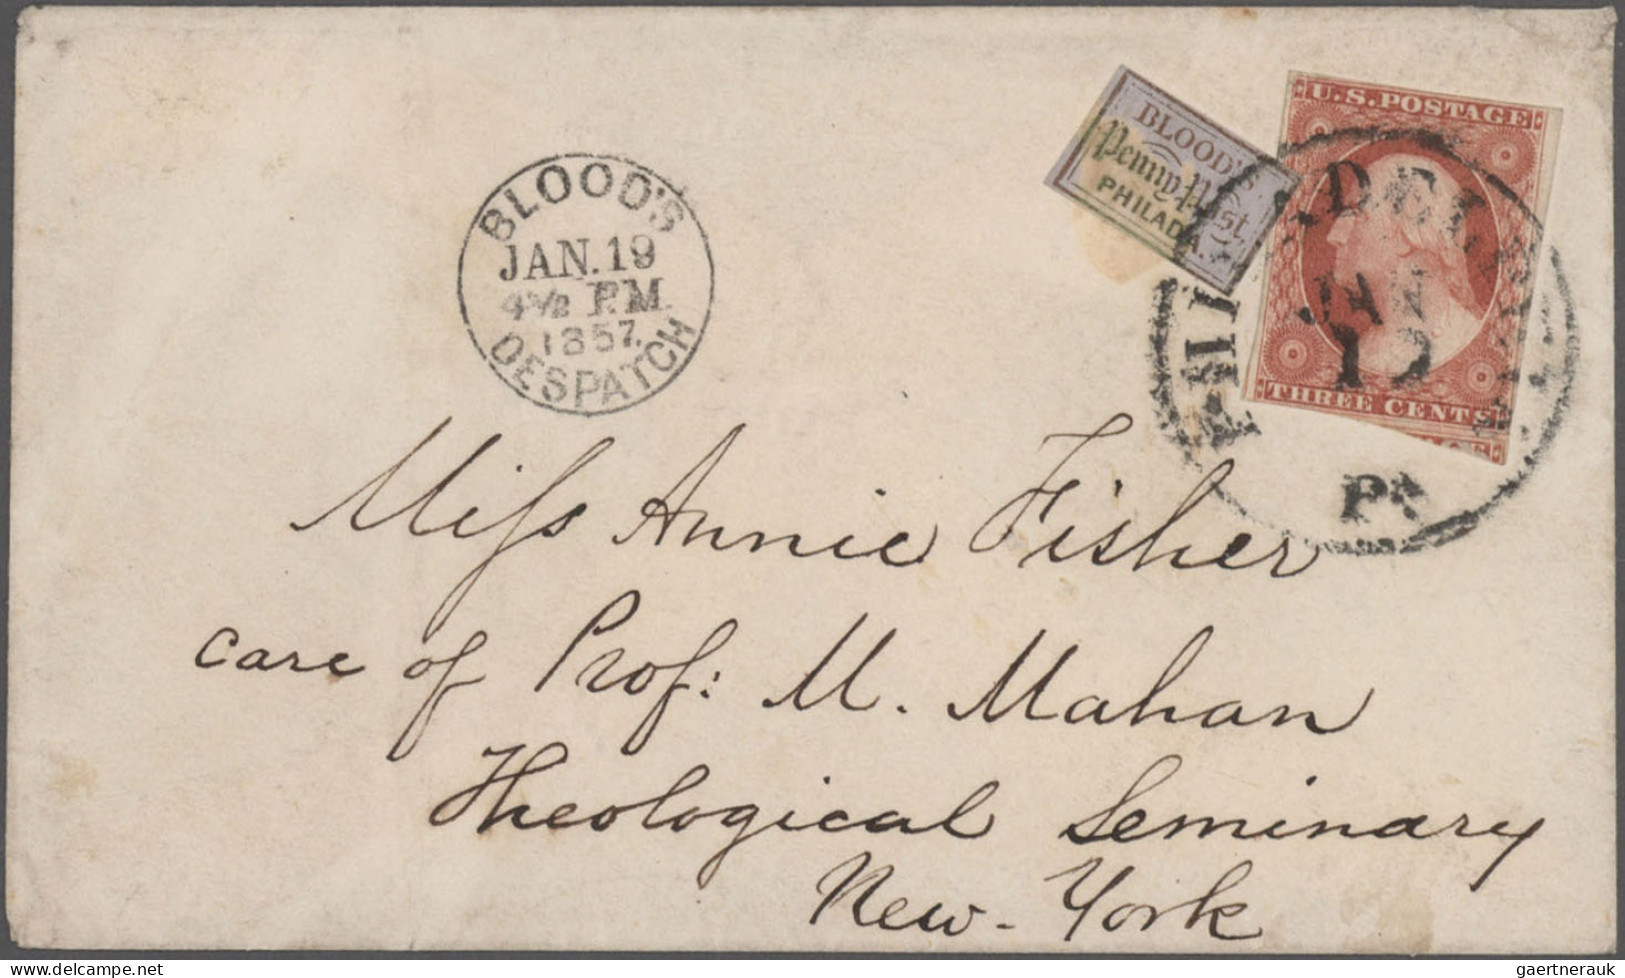 United States of America: 1850/1880 (ca.), Blood's Philadelphia and Boyd's New Y